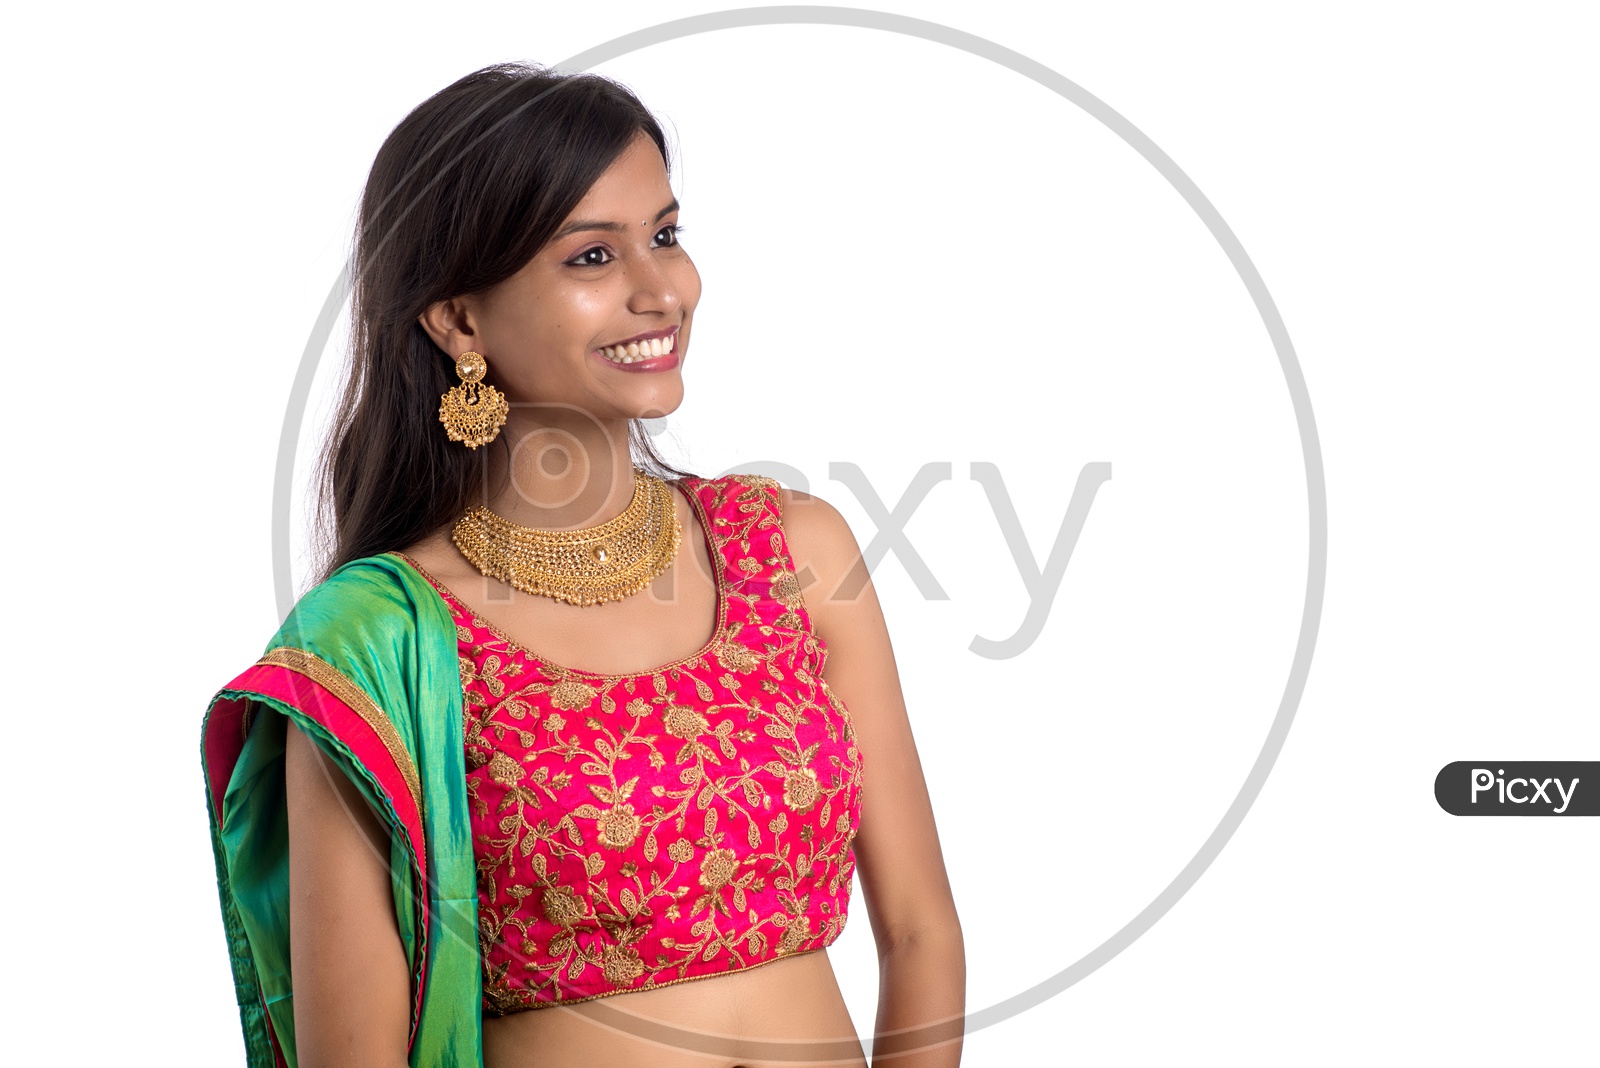 Portrait Of a Young traditional Indian Woman  Smiling  Over a White Background